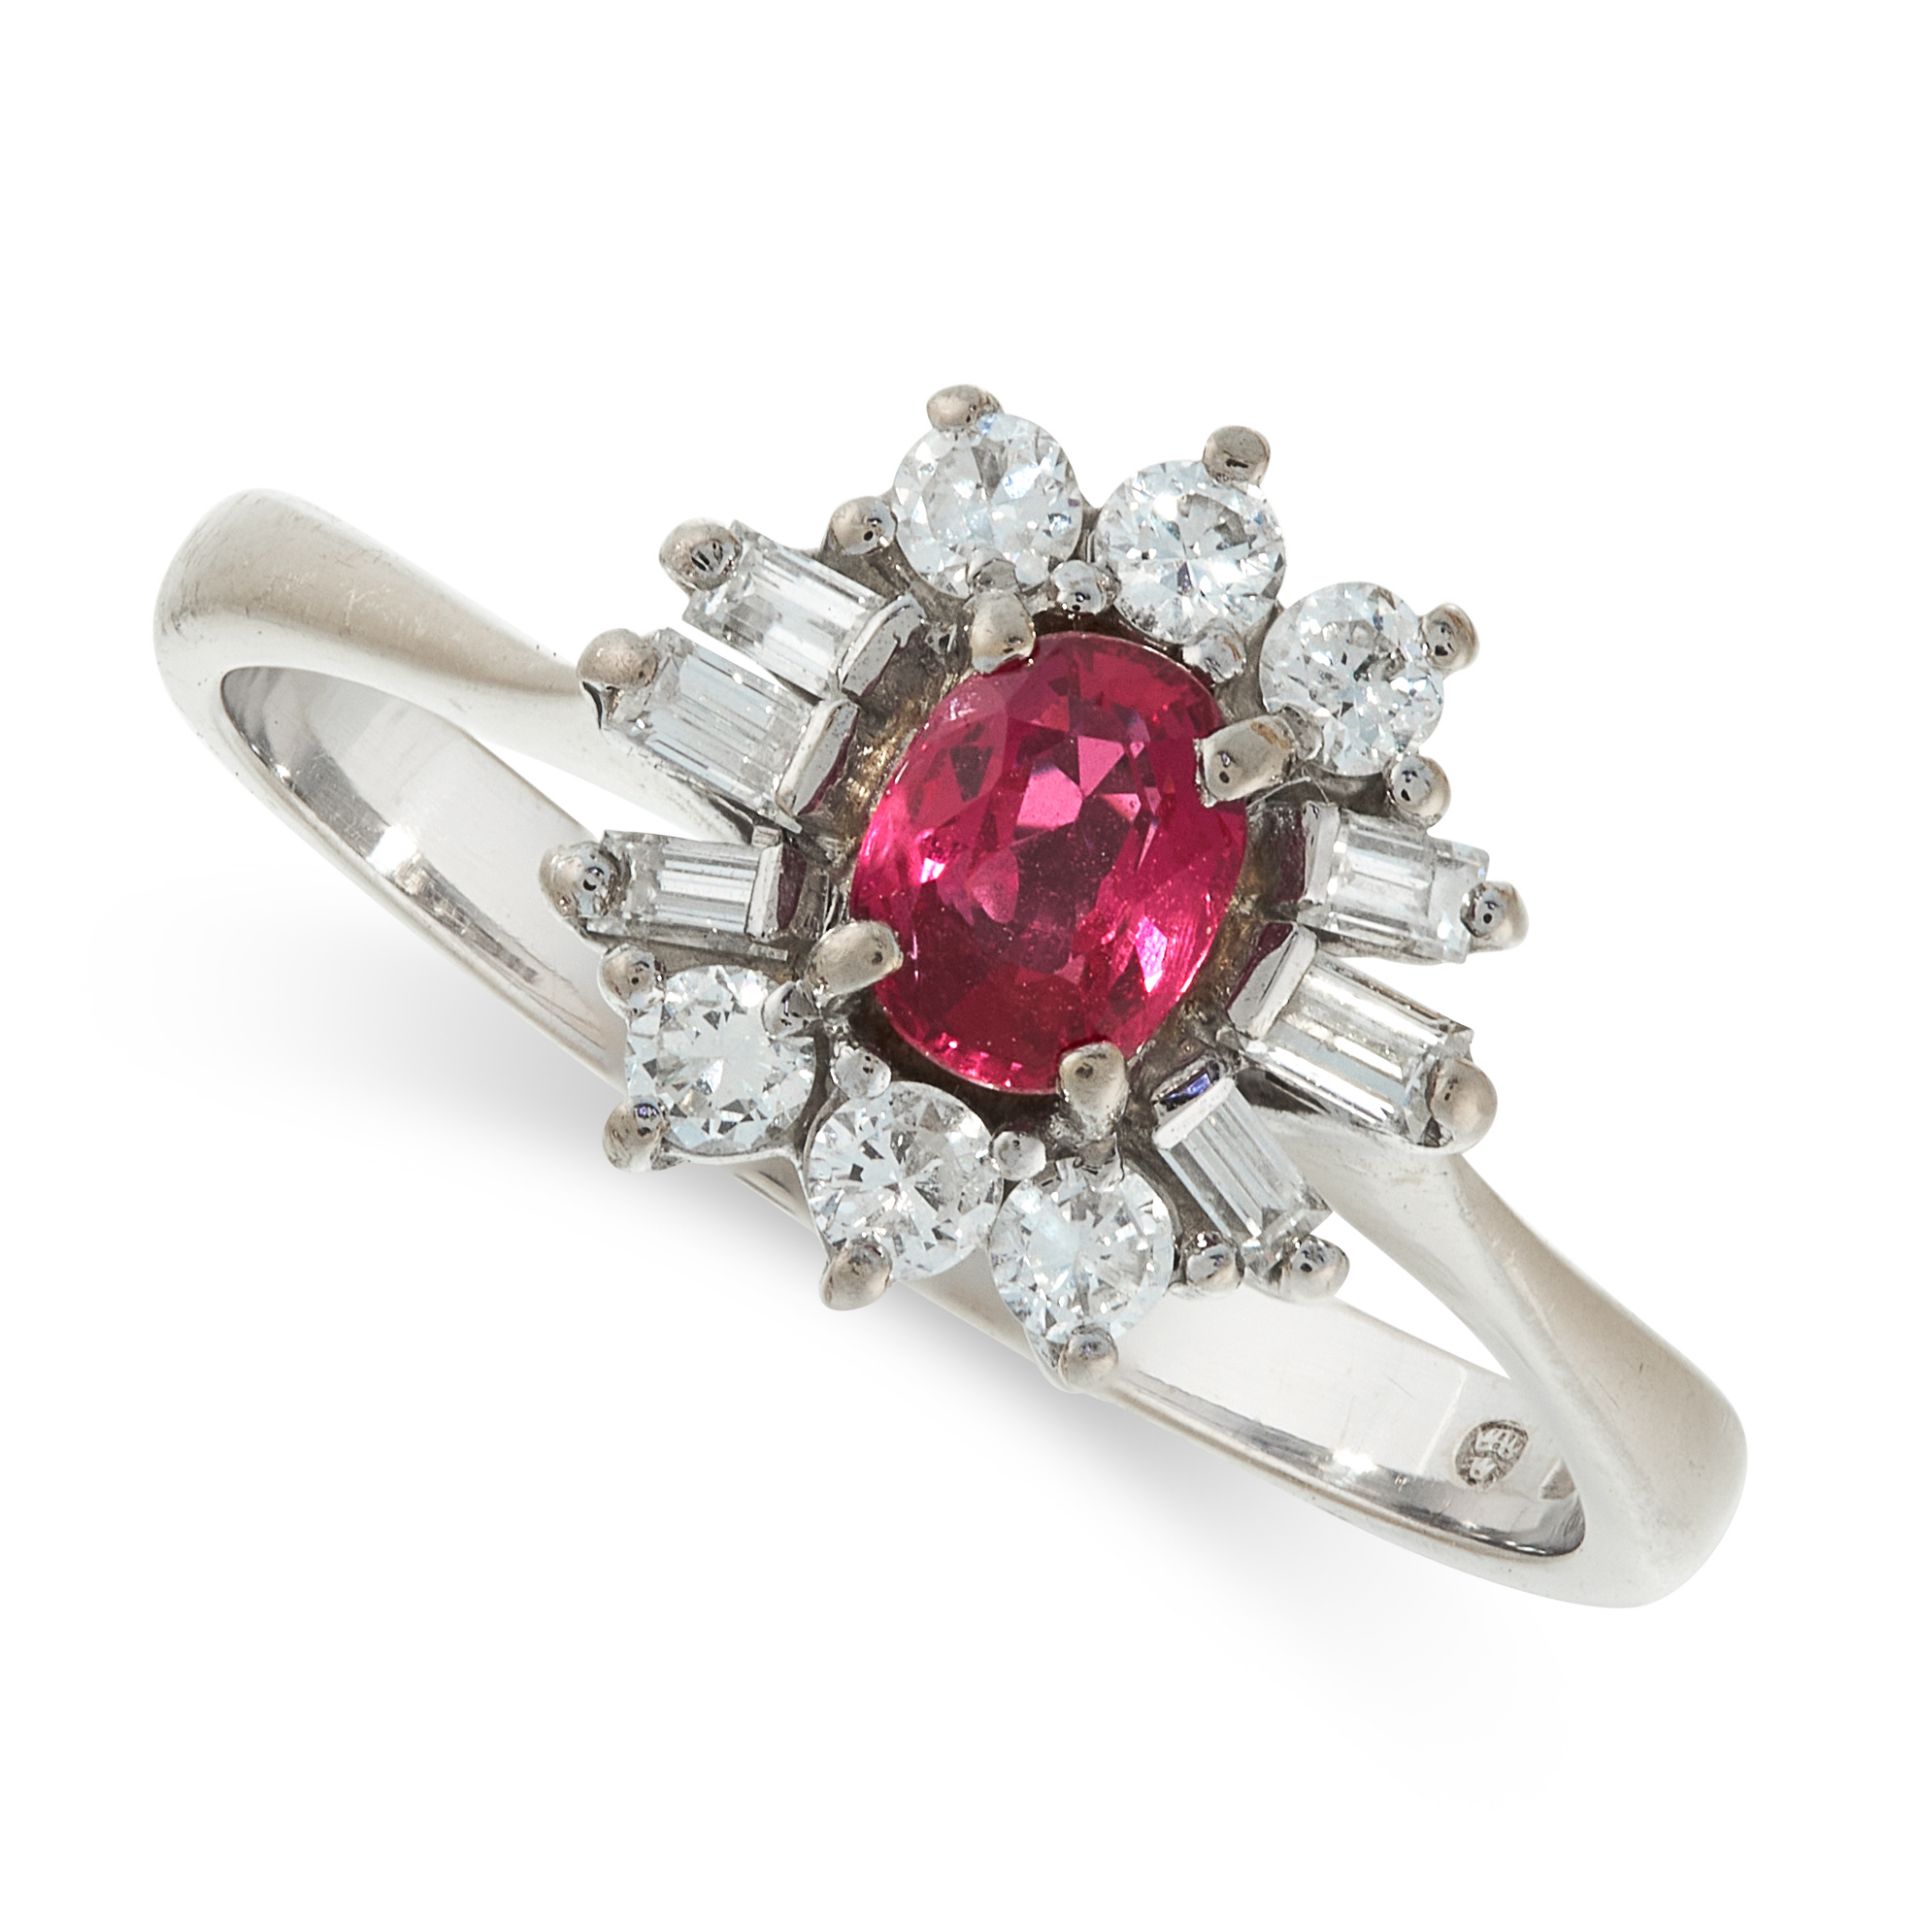 A RUBY AND DIAMOND RING of cluster design, claw set with an oval ruby within a border of brilliant